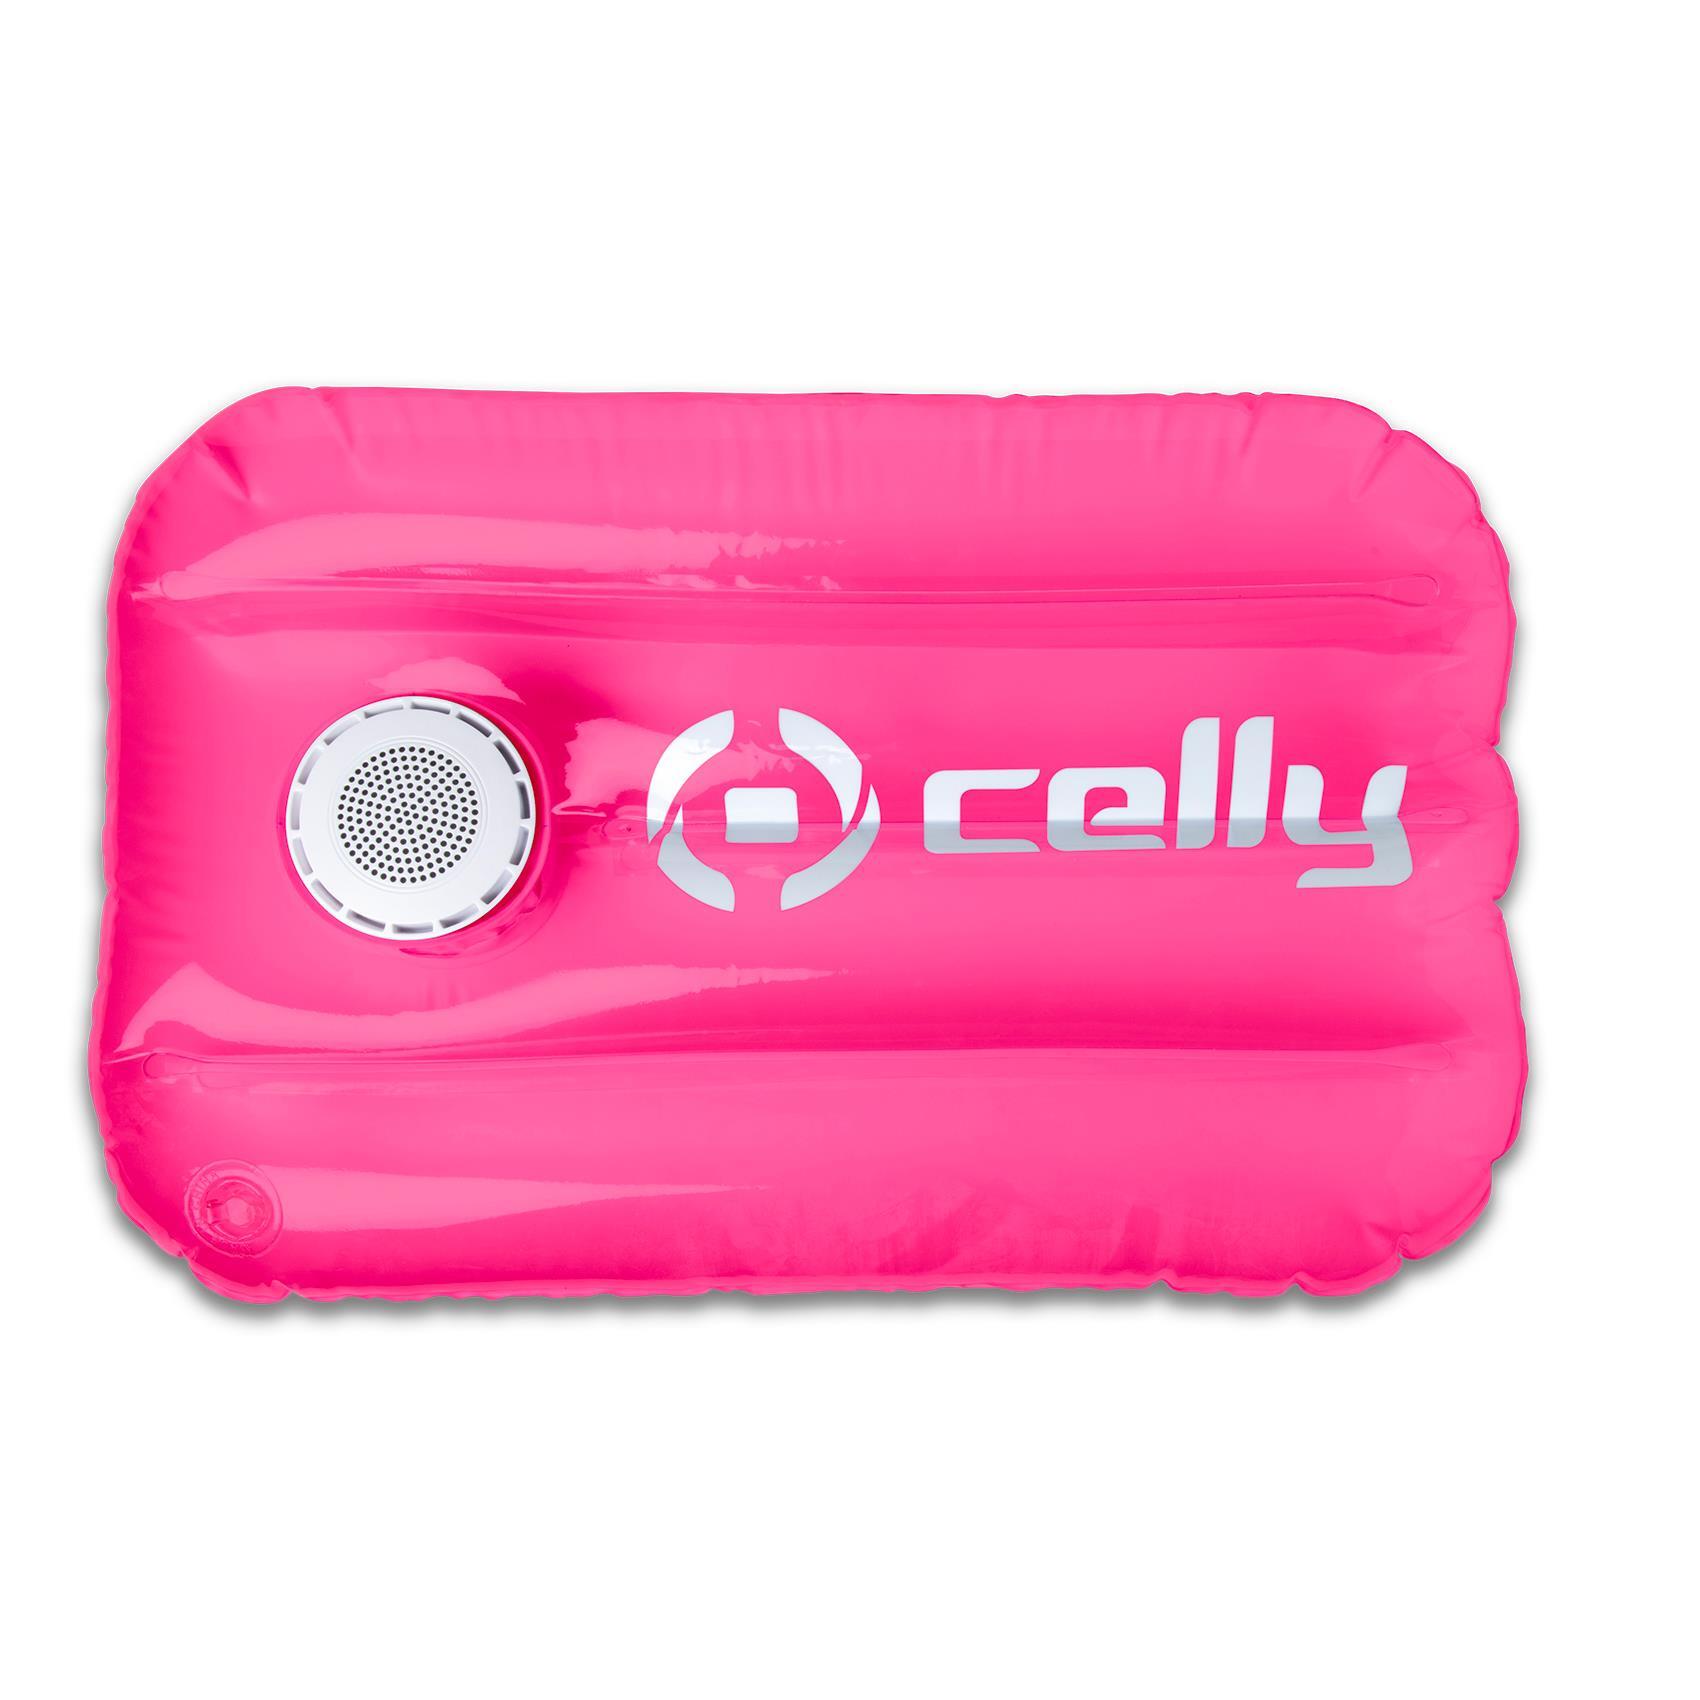 Celly Poolpillow roze